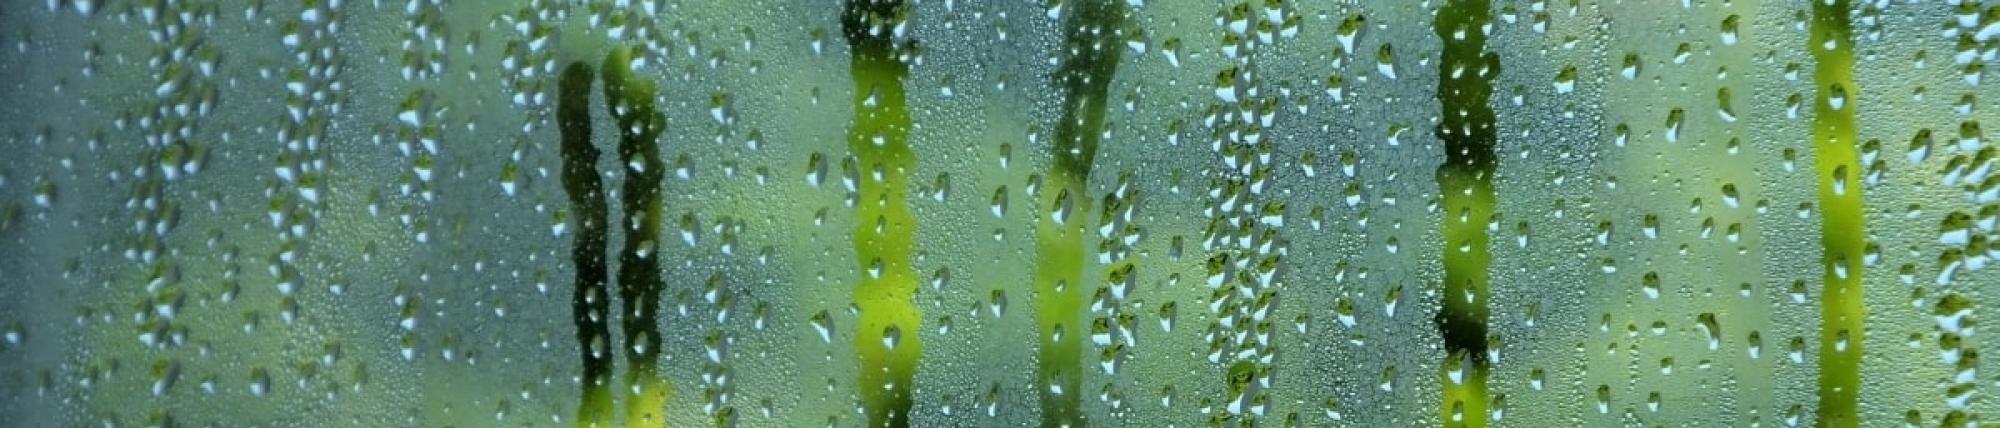 image of a dewy window caused from condensation